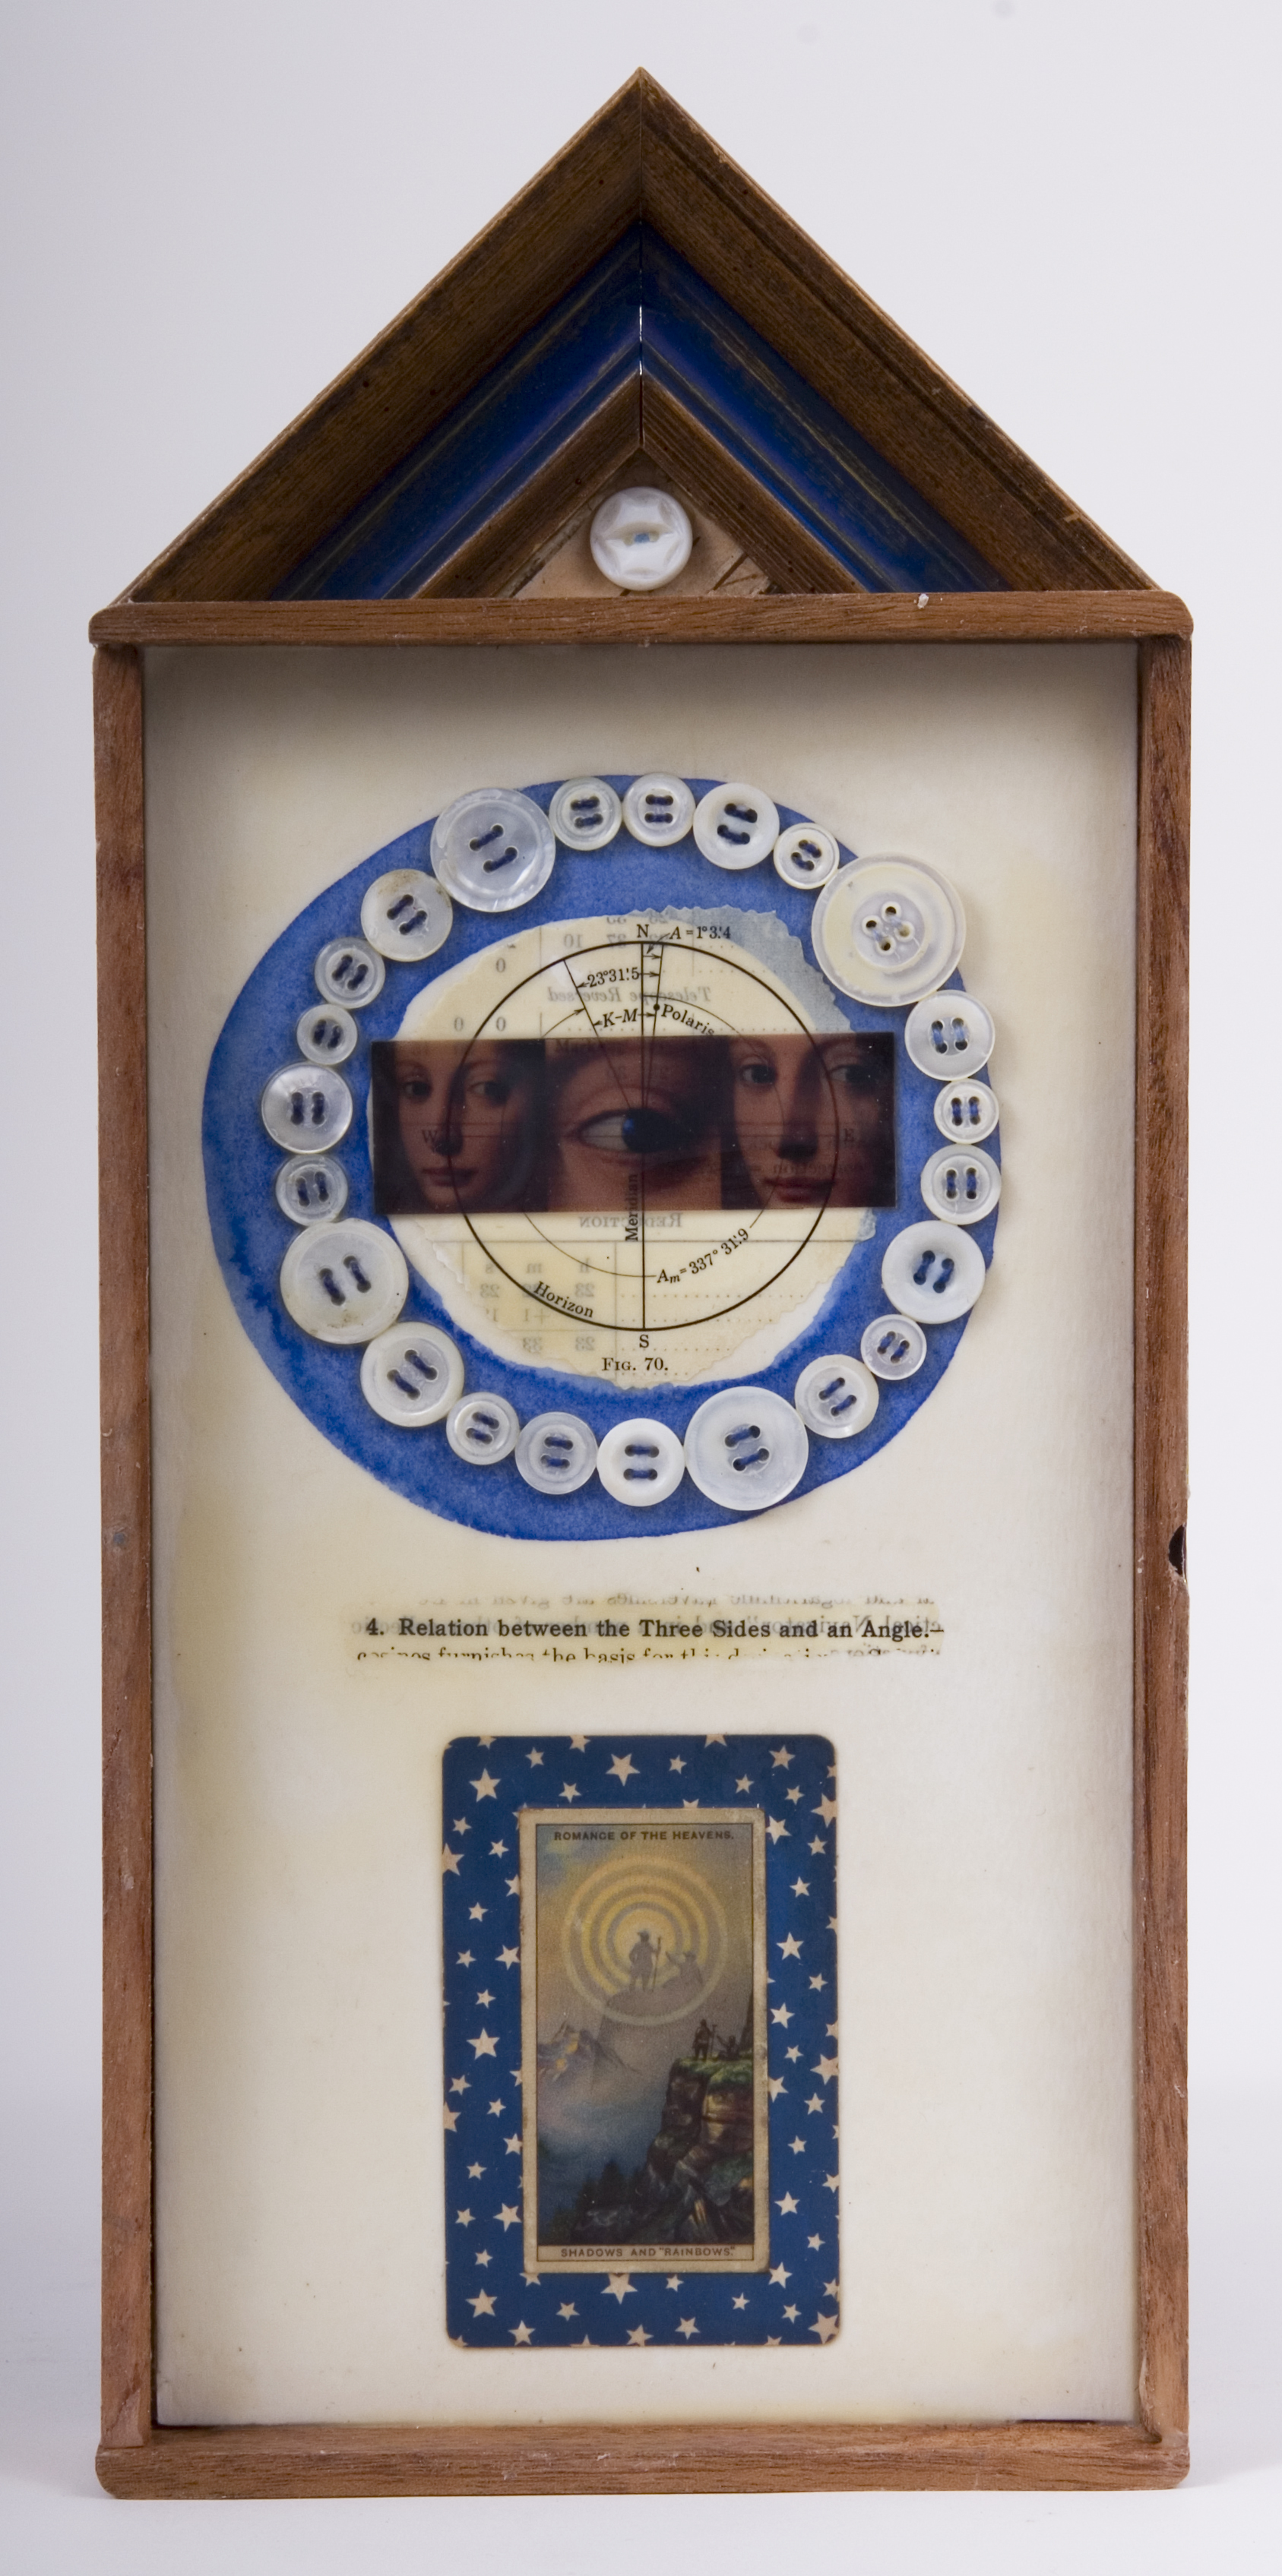     \"4. Relation between the three Sides and an Angle\"
    mixed-media assemblage
    13.75 x 6.25 x 1.75
    2009
    SOLD
    Cigar box, frame sample, birch bark, mother of pearl buttons, fortune & tobac cards, transparency, ink, wax, astronomy text on watercolor paper